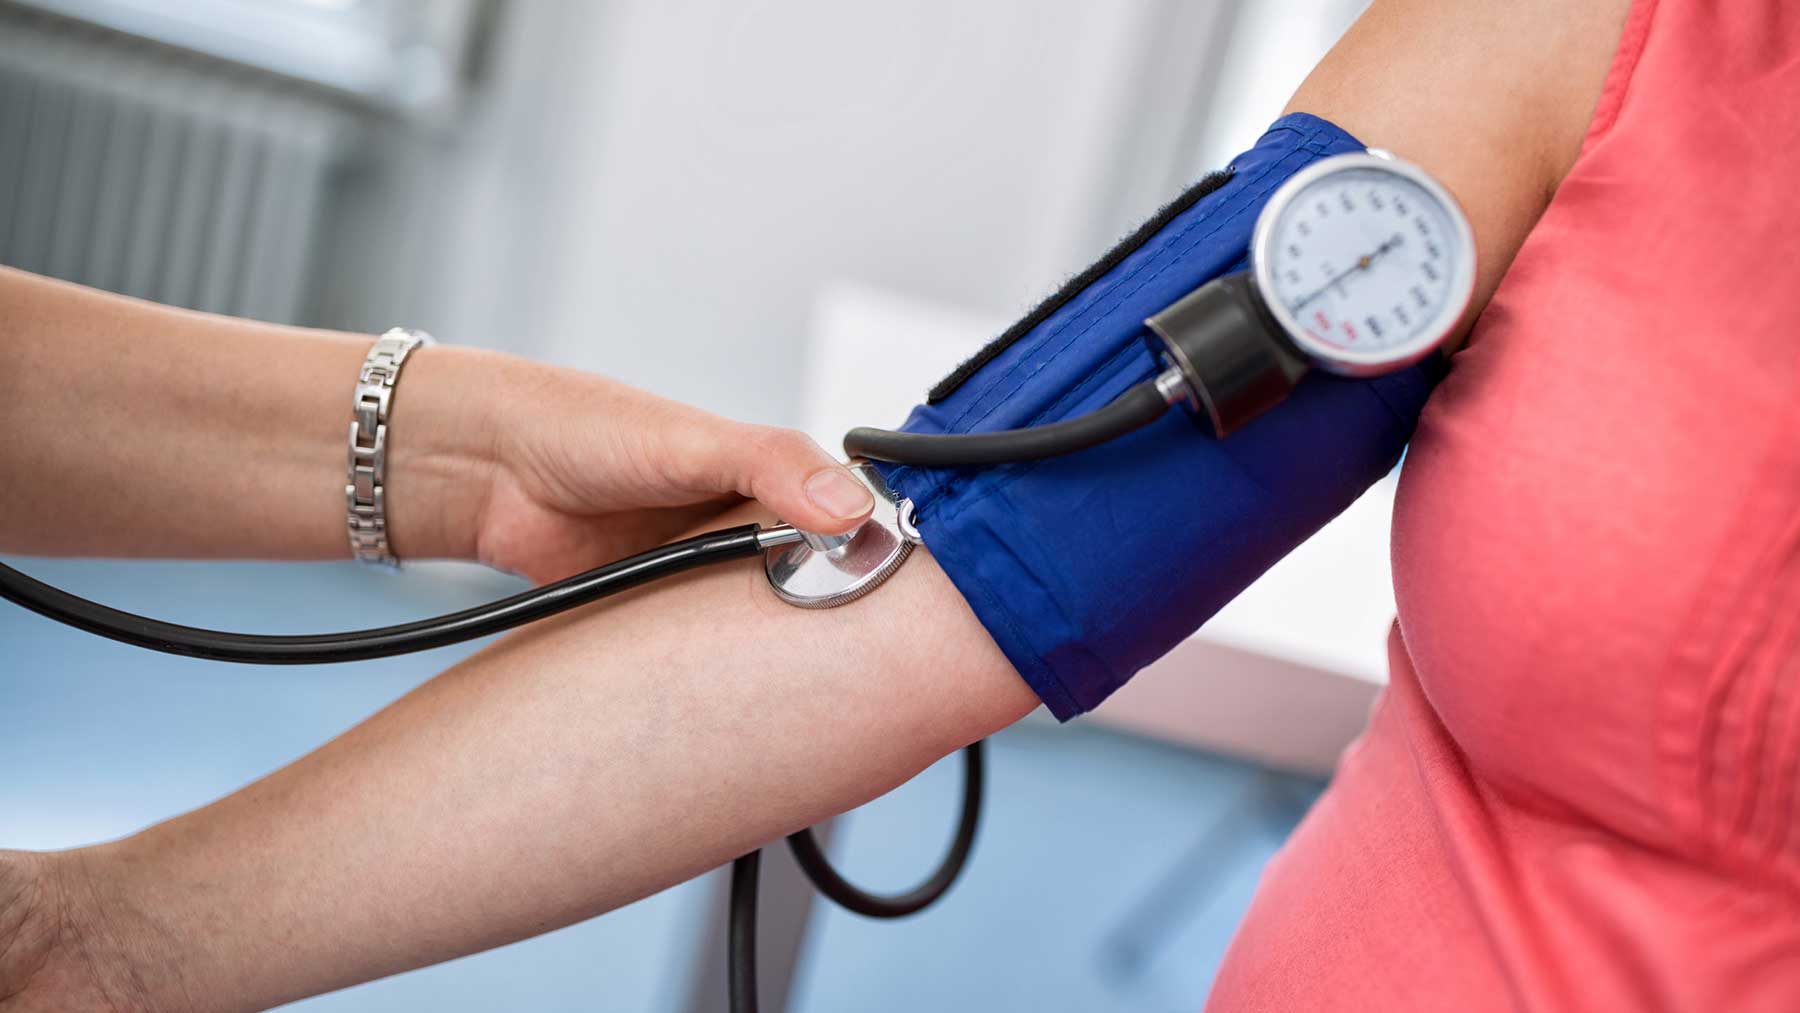 Six ways to lower your blood pressure | Ohio State Medical Center